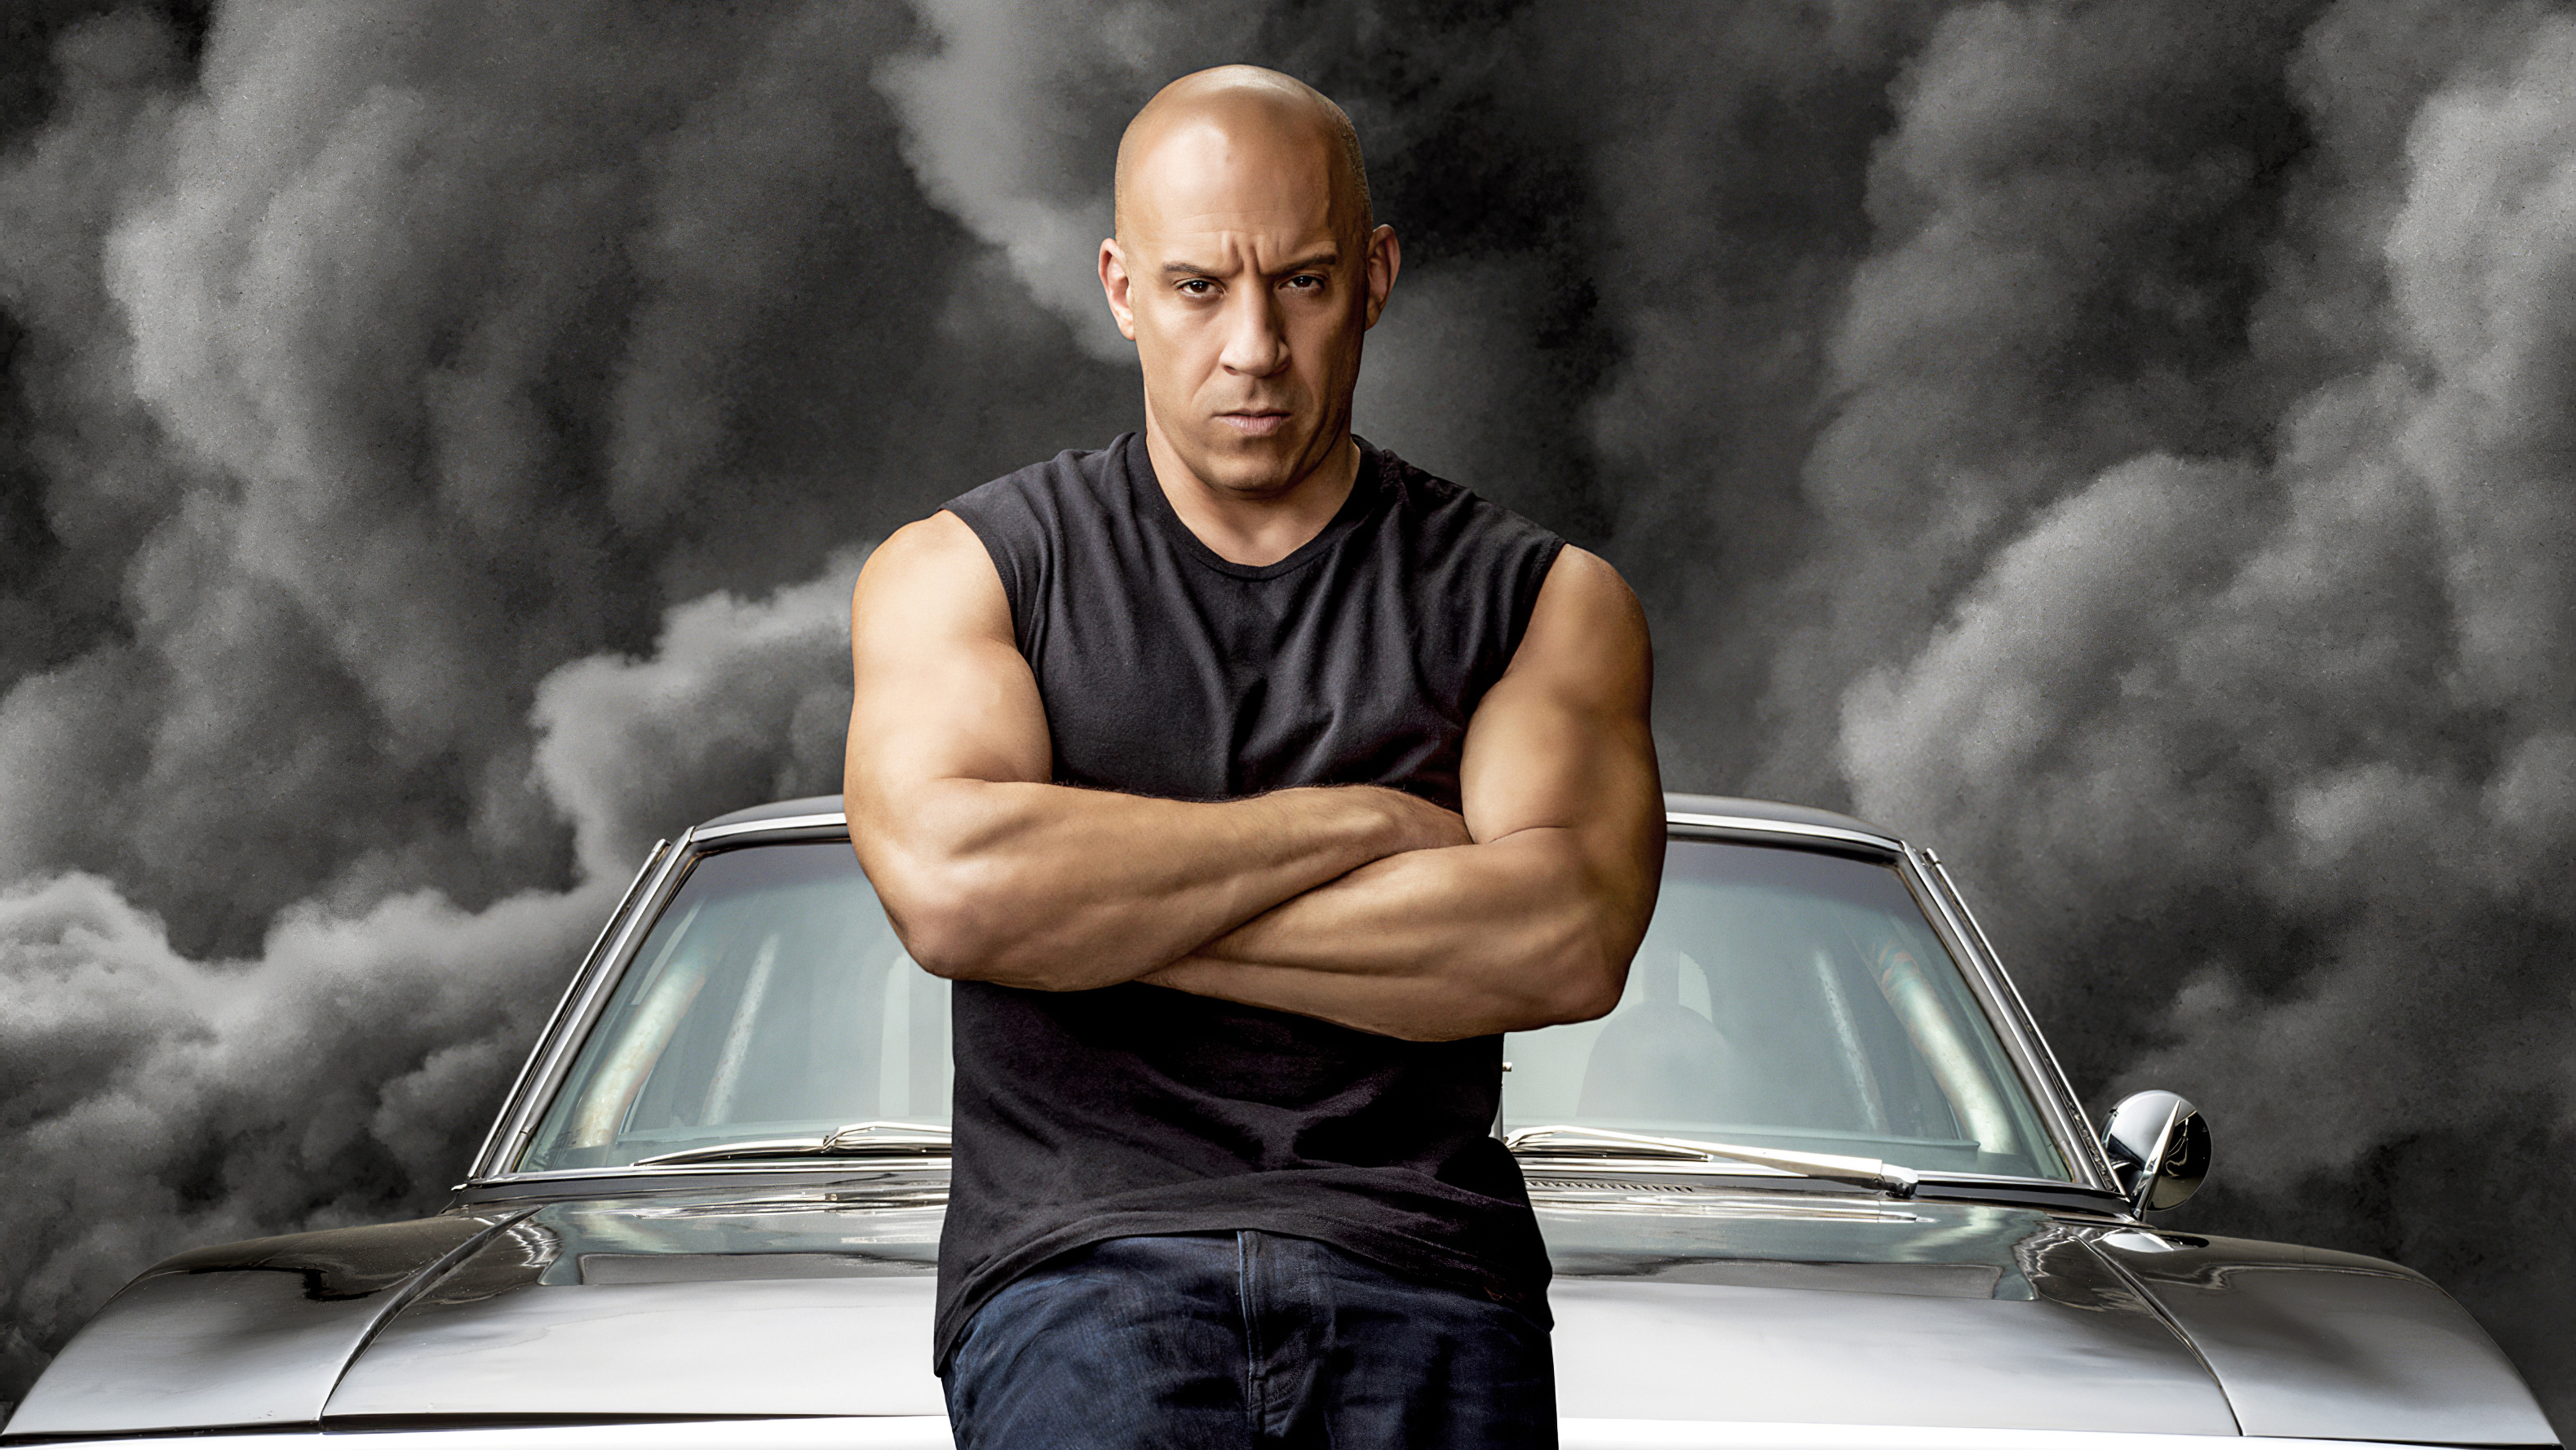 Dominic Toretto In Fast And Furious 9 2020 Movie Wallpaper HD Movies 